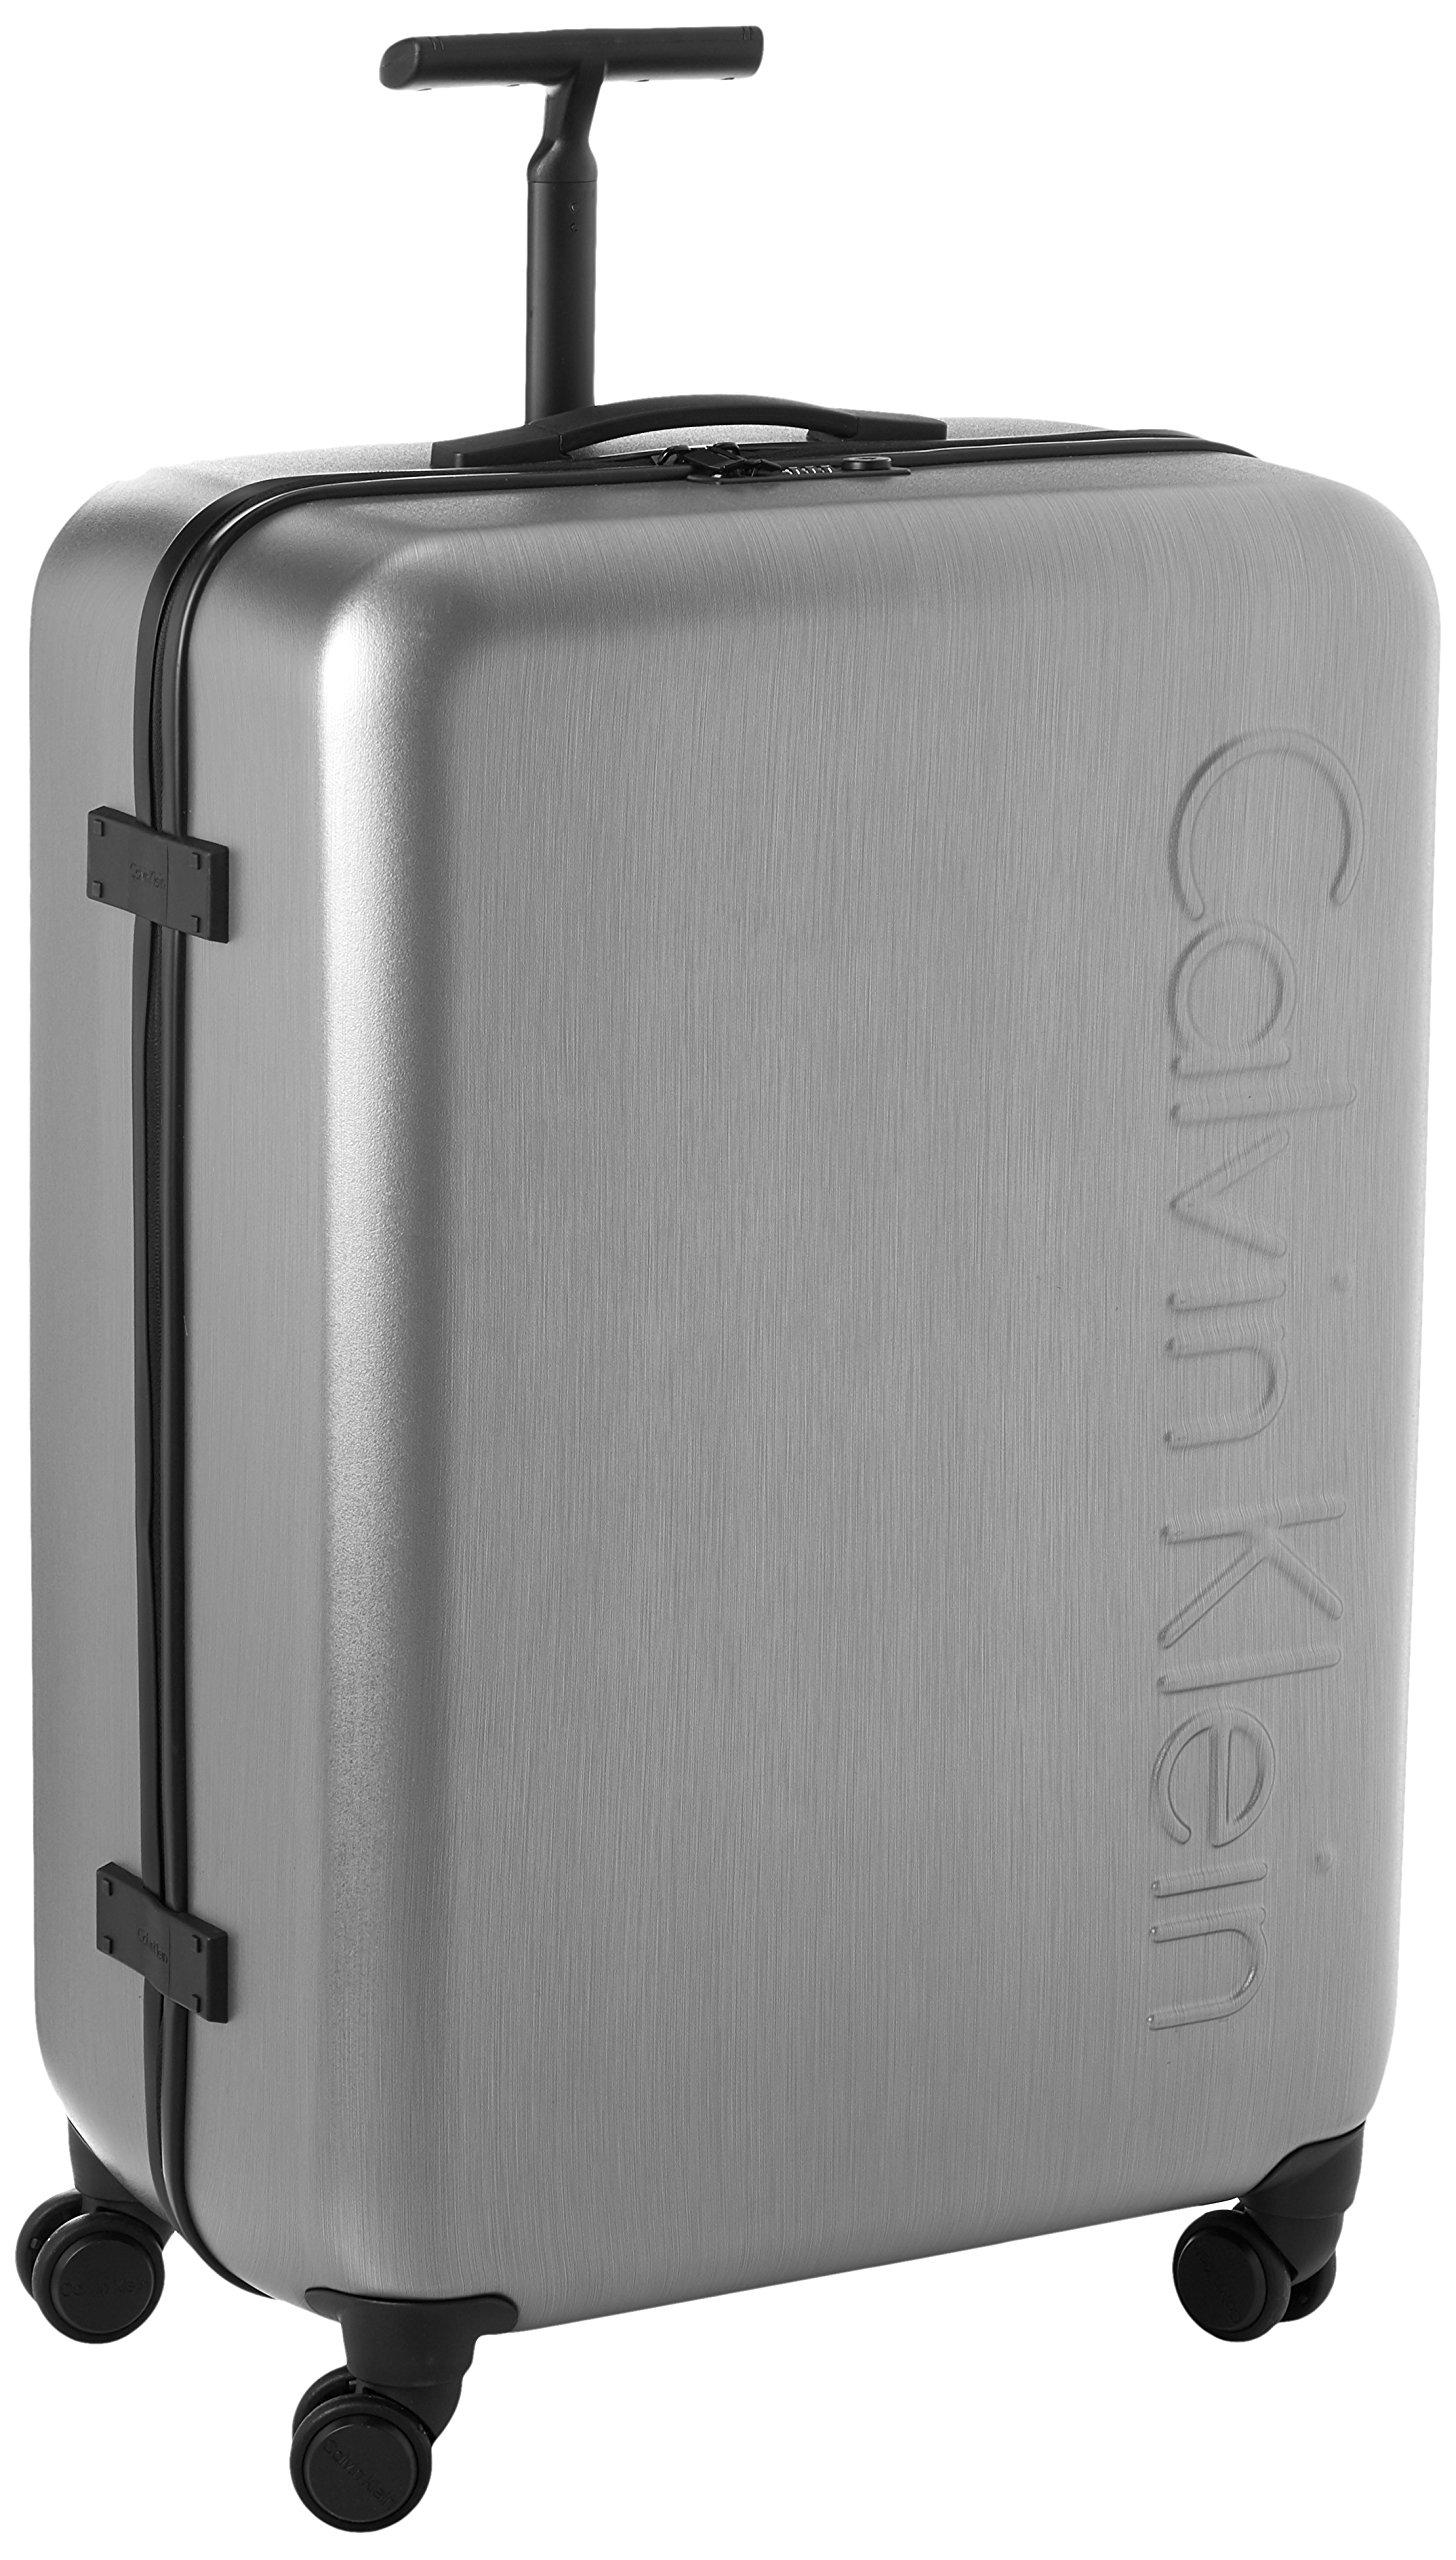 Calvin Klein Southampton Hardside Spinner Luggage in Graphite (Gray) - Lyst